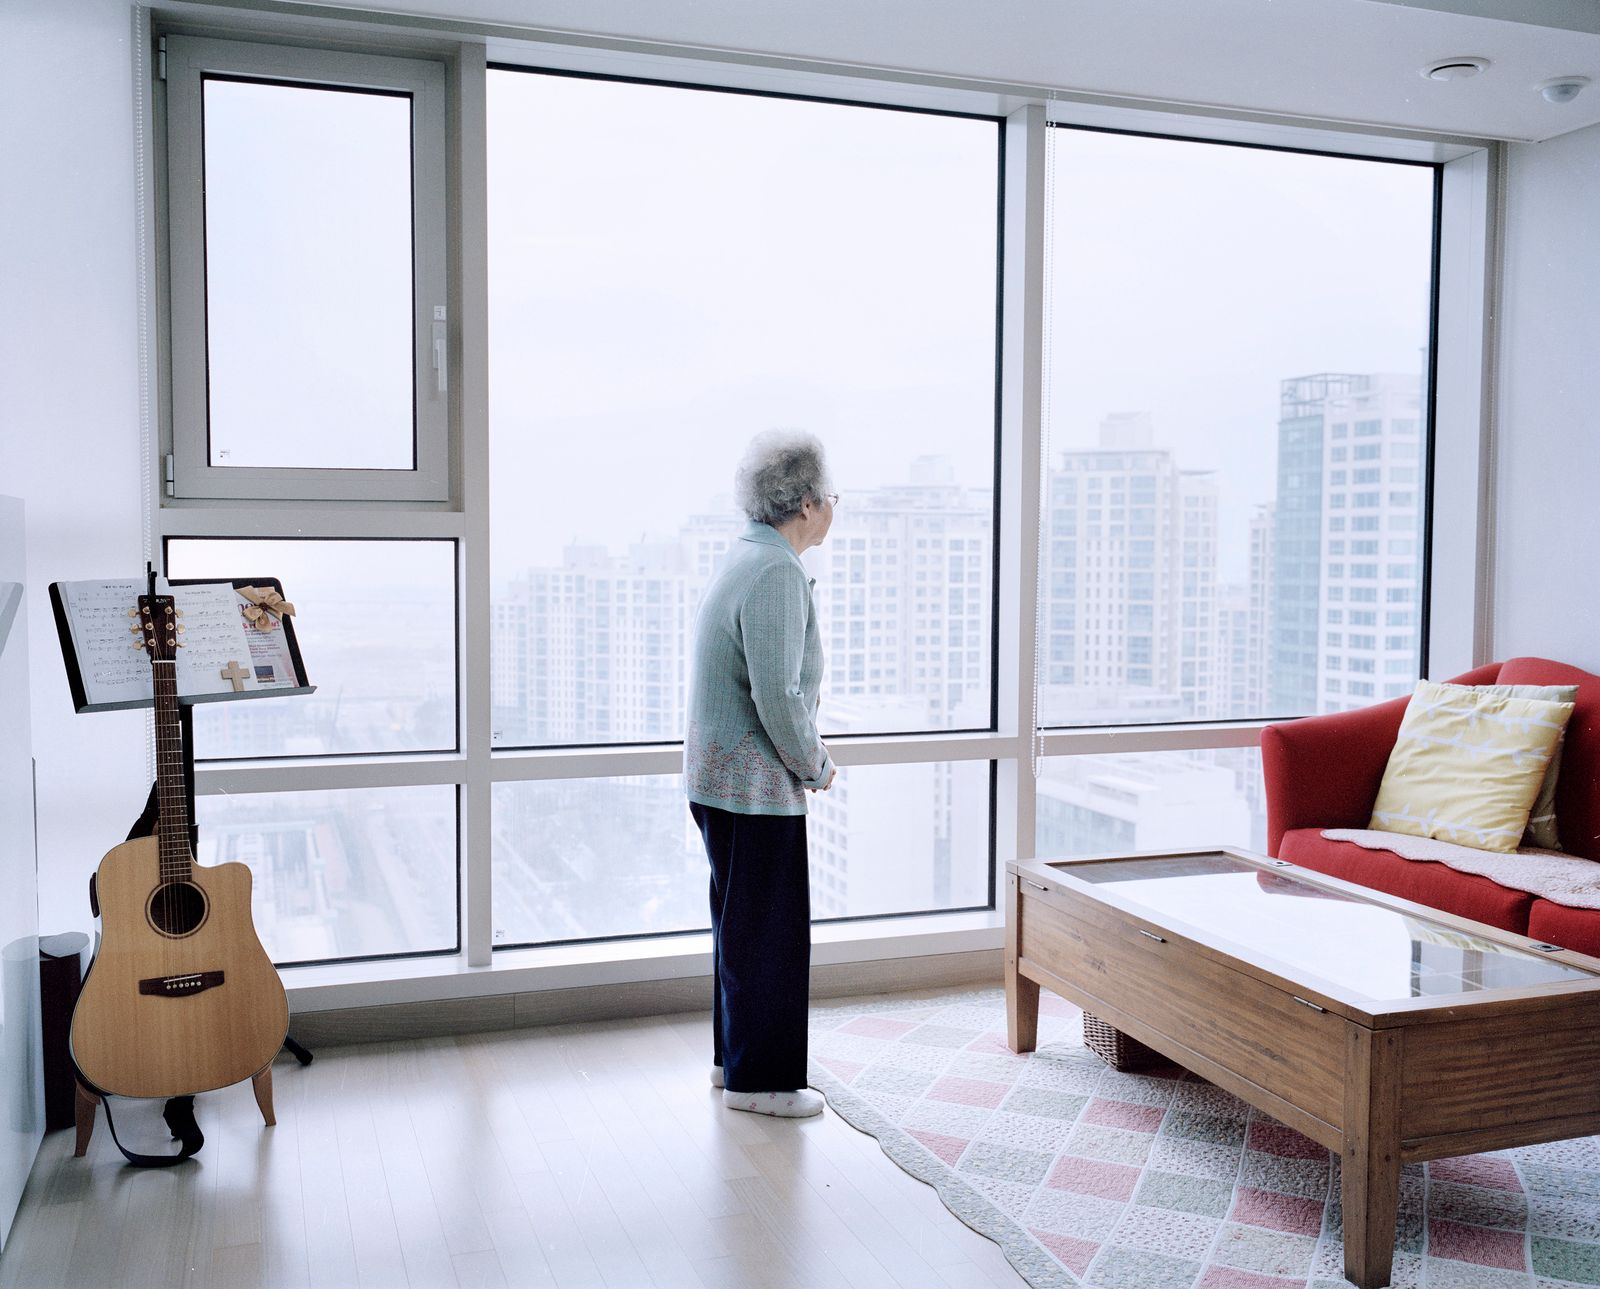 © Giulio Di Sturco - An old Lady looking outside her window on her new home in New Songdo city.